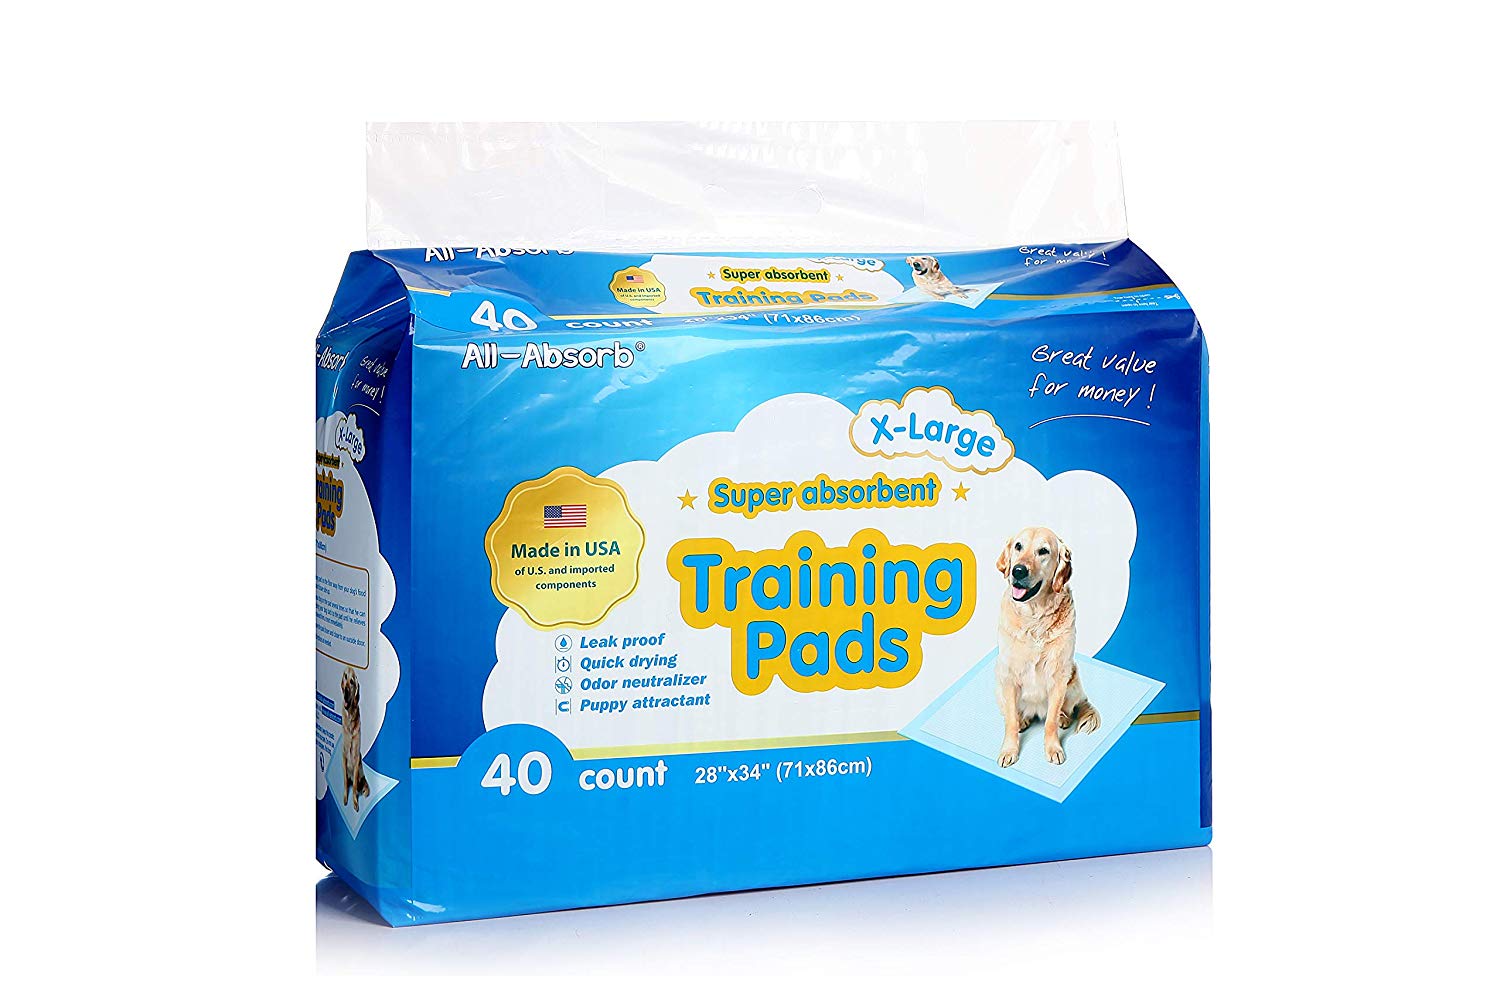 All Absorb Pet Pads